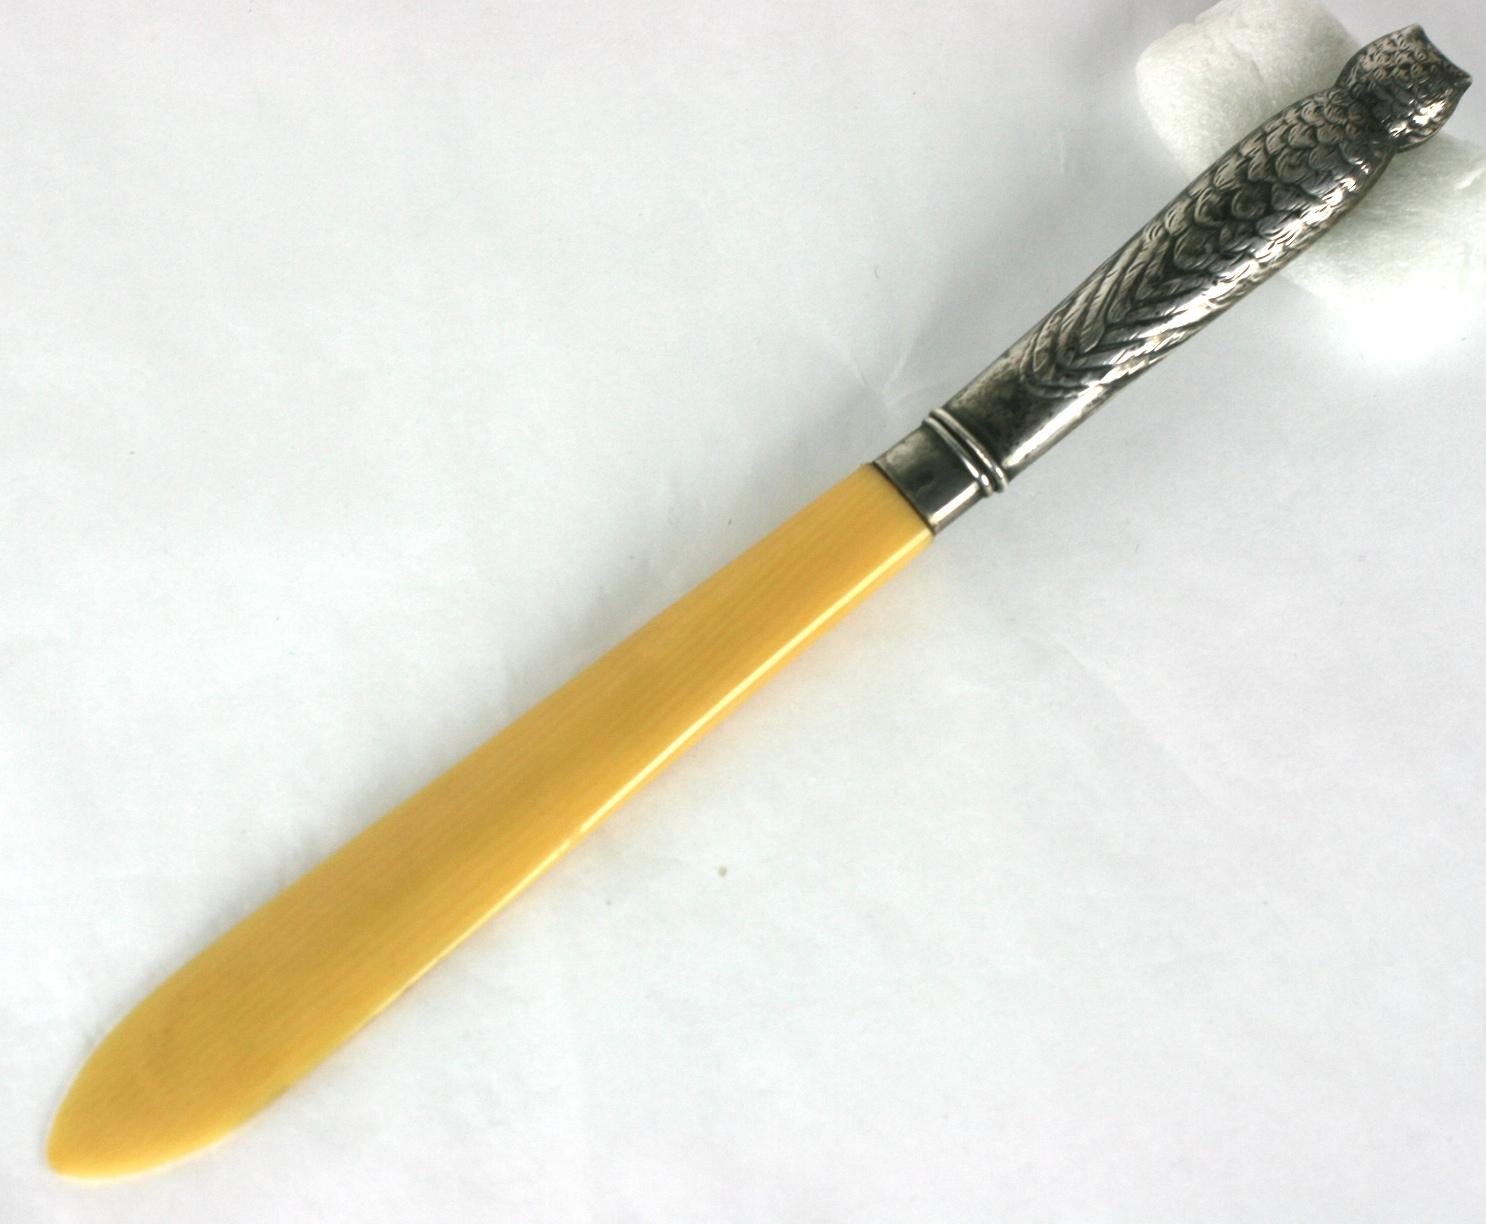 Victorian Owl Letter Opener crafted of 800 grade silver with celluloid and glass eyes. Charming figural, novelty motif from the late 19th Century. Beautiful detailing.
Cap removes to expose blade for opening letters.
1880's Germany. 6.75